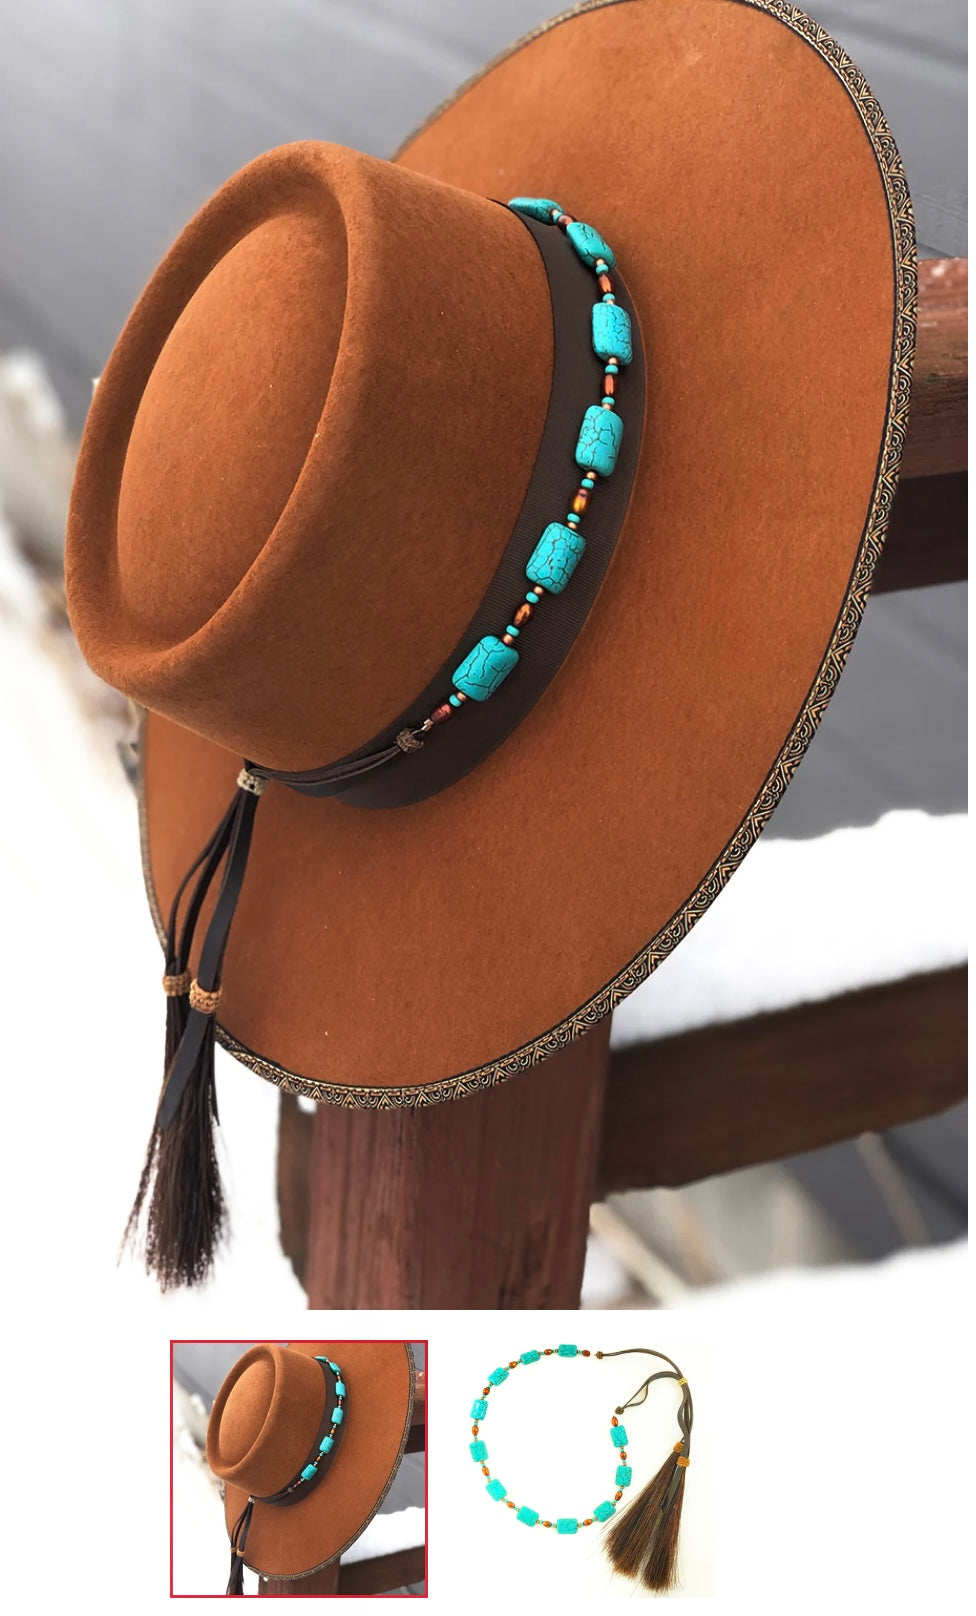 The Ginger Hatband